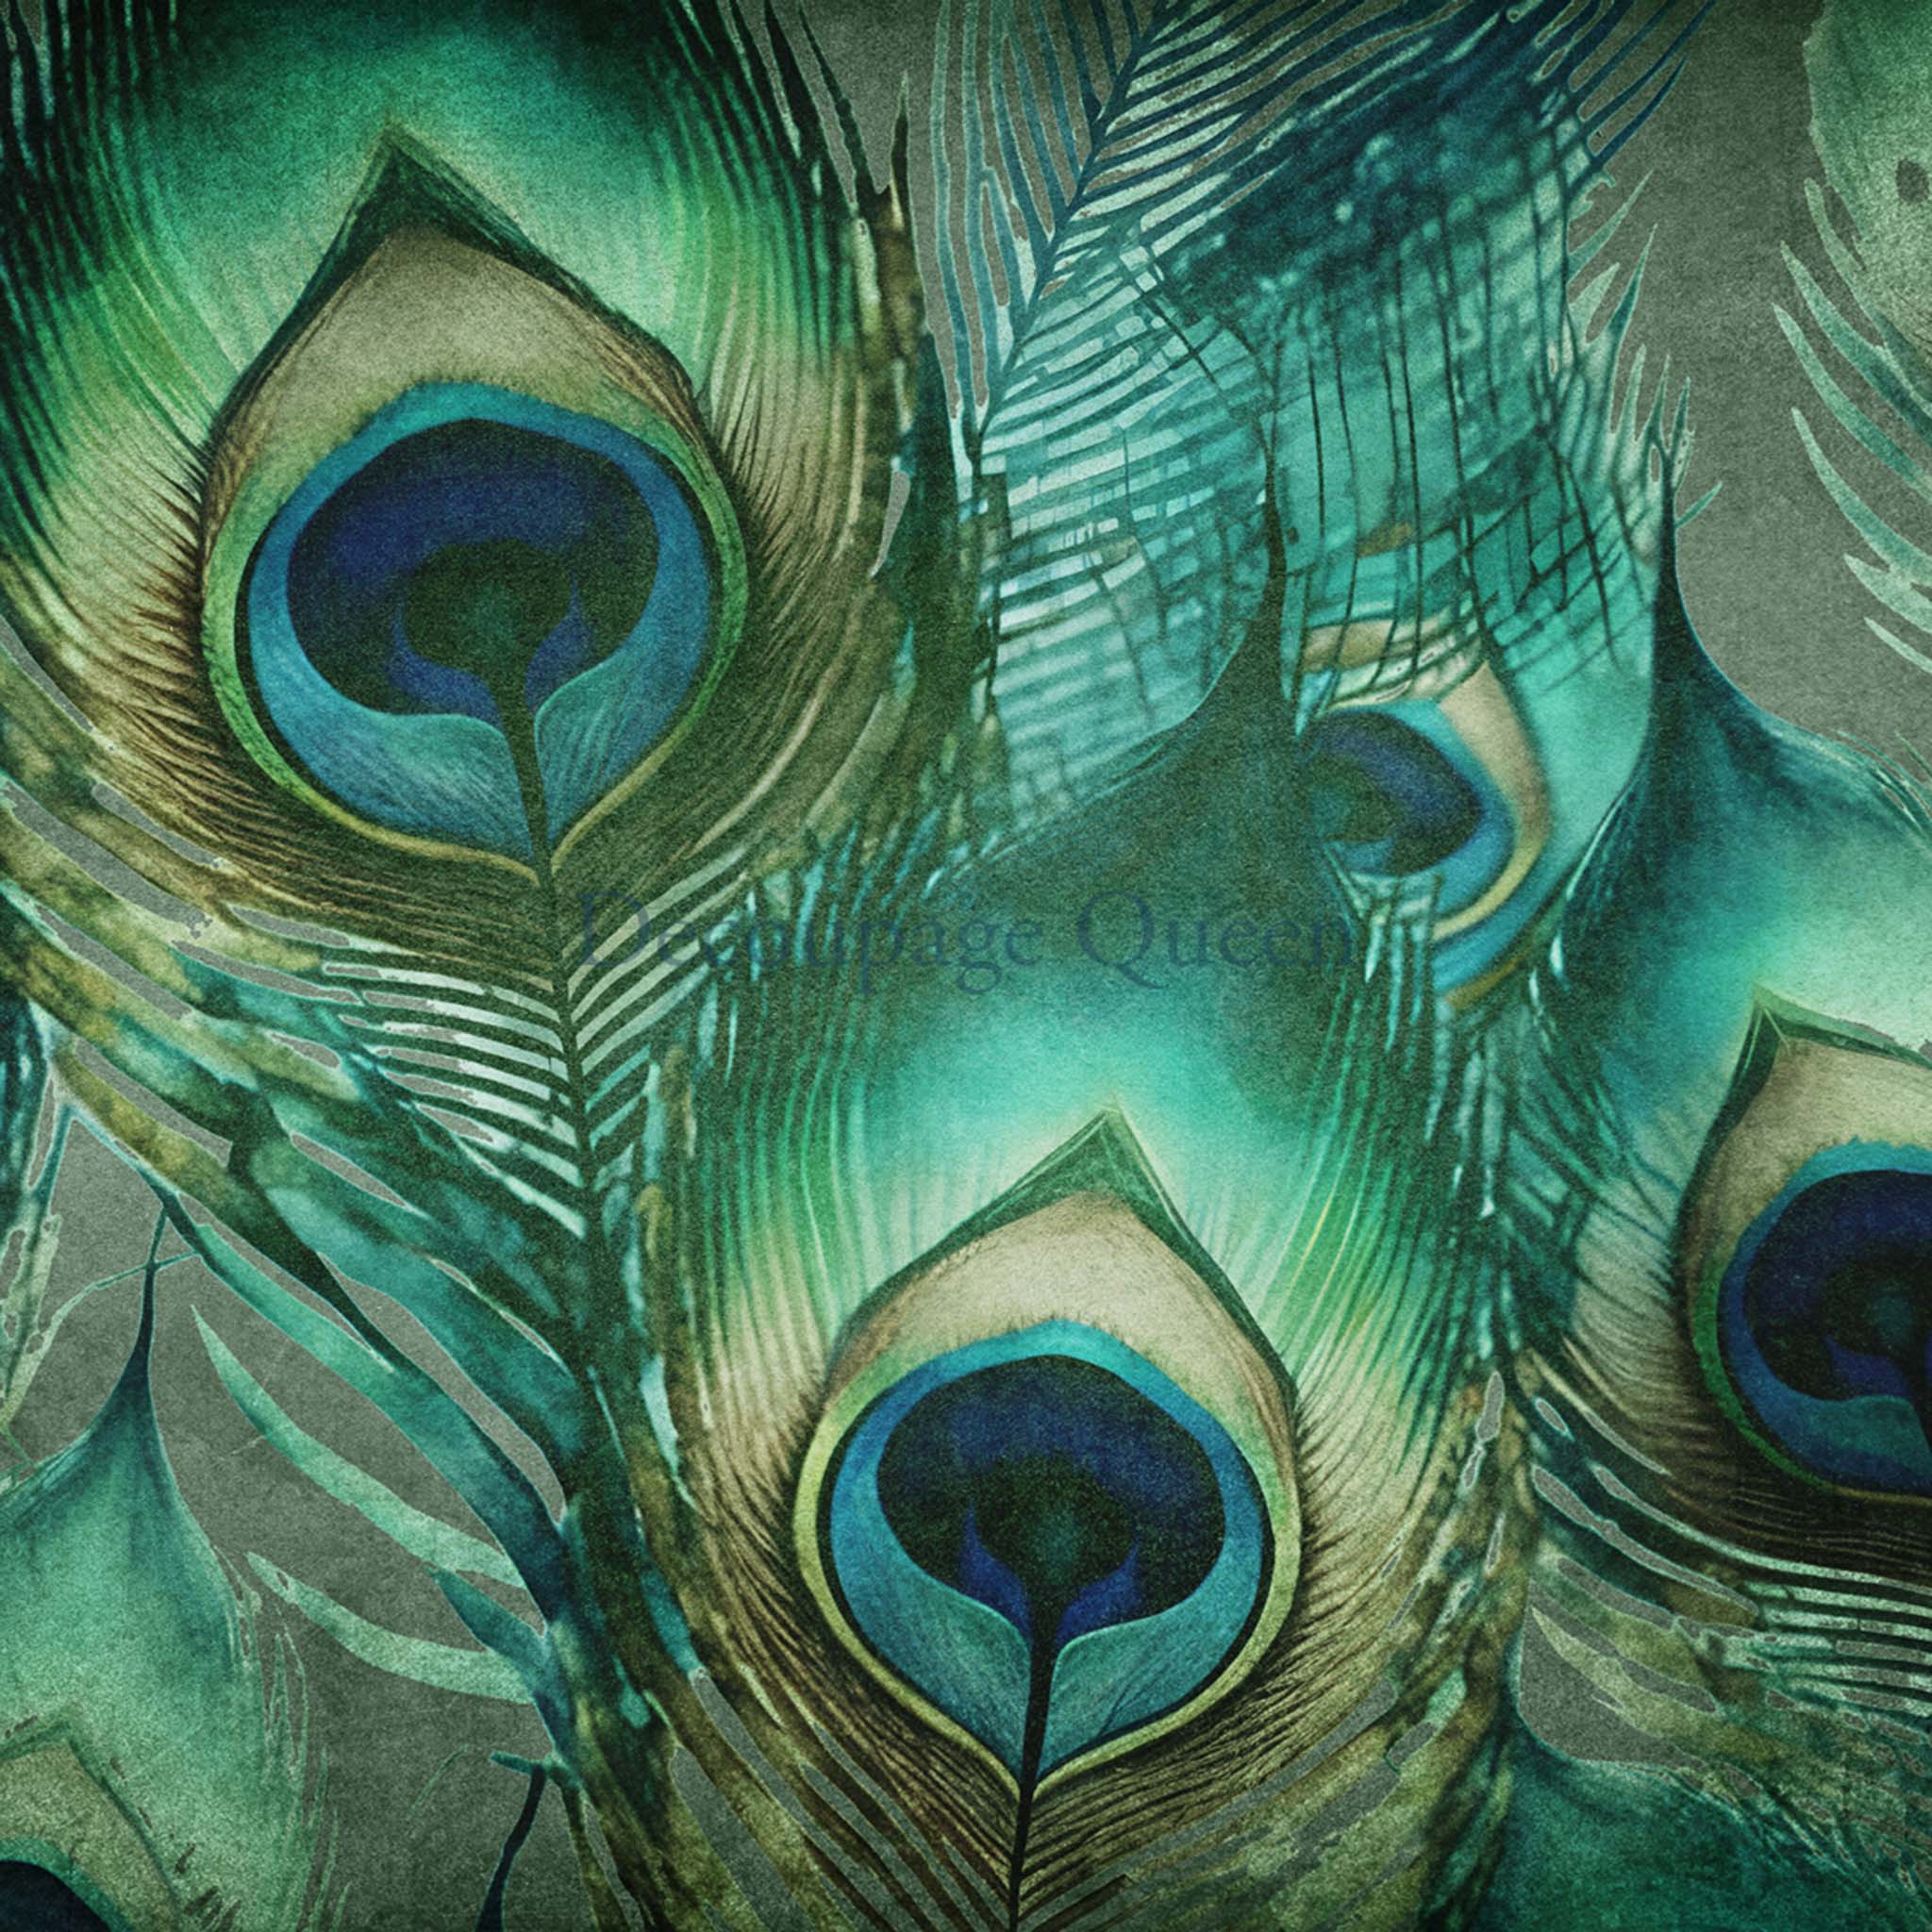 Close-up of an A4 rice paper design that features a close-up of peacock feathers in shades of jade, teal, and navy.